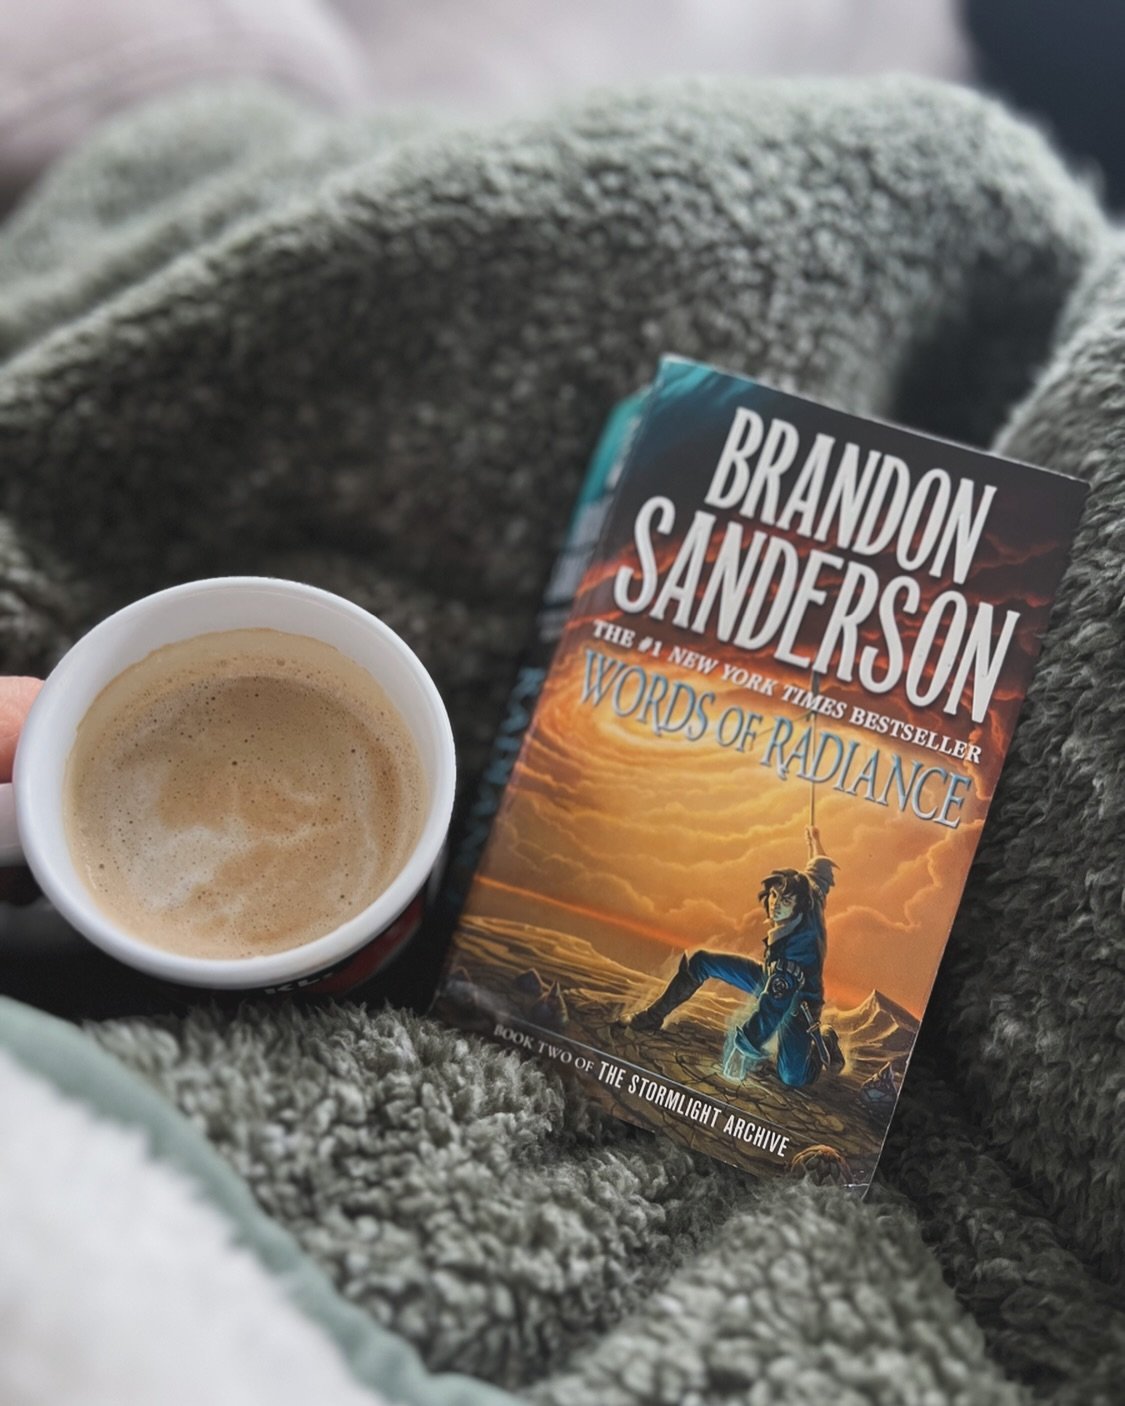 I&rsquo;m back from my 11 day trip to Alberta, enjoying a quiet morning with a book (I&rsquo;m really loving the Cosmere books so far), coffee, and my cats 📚☕️🐈&zwj;⬛

While on my trip, I finished the audiobook for Iron Flame by Rebecca Yarros. Nex